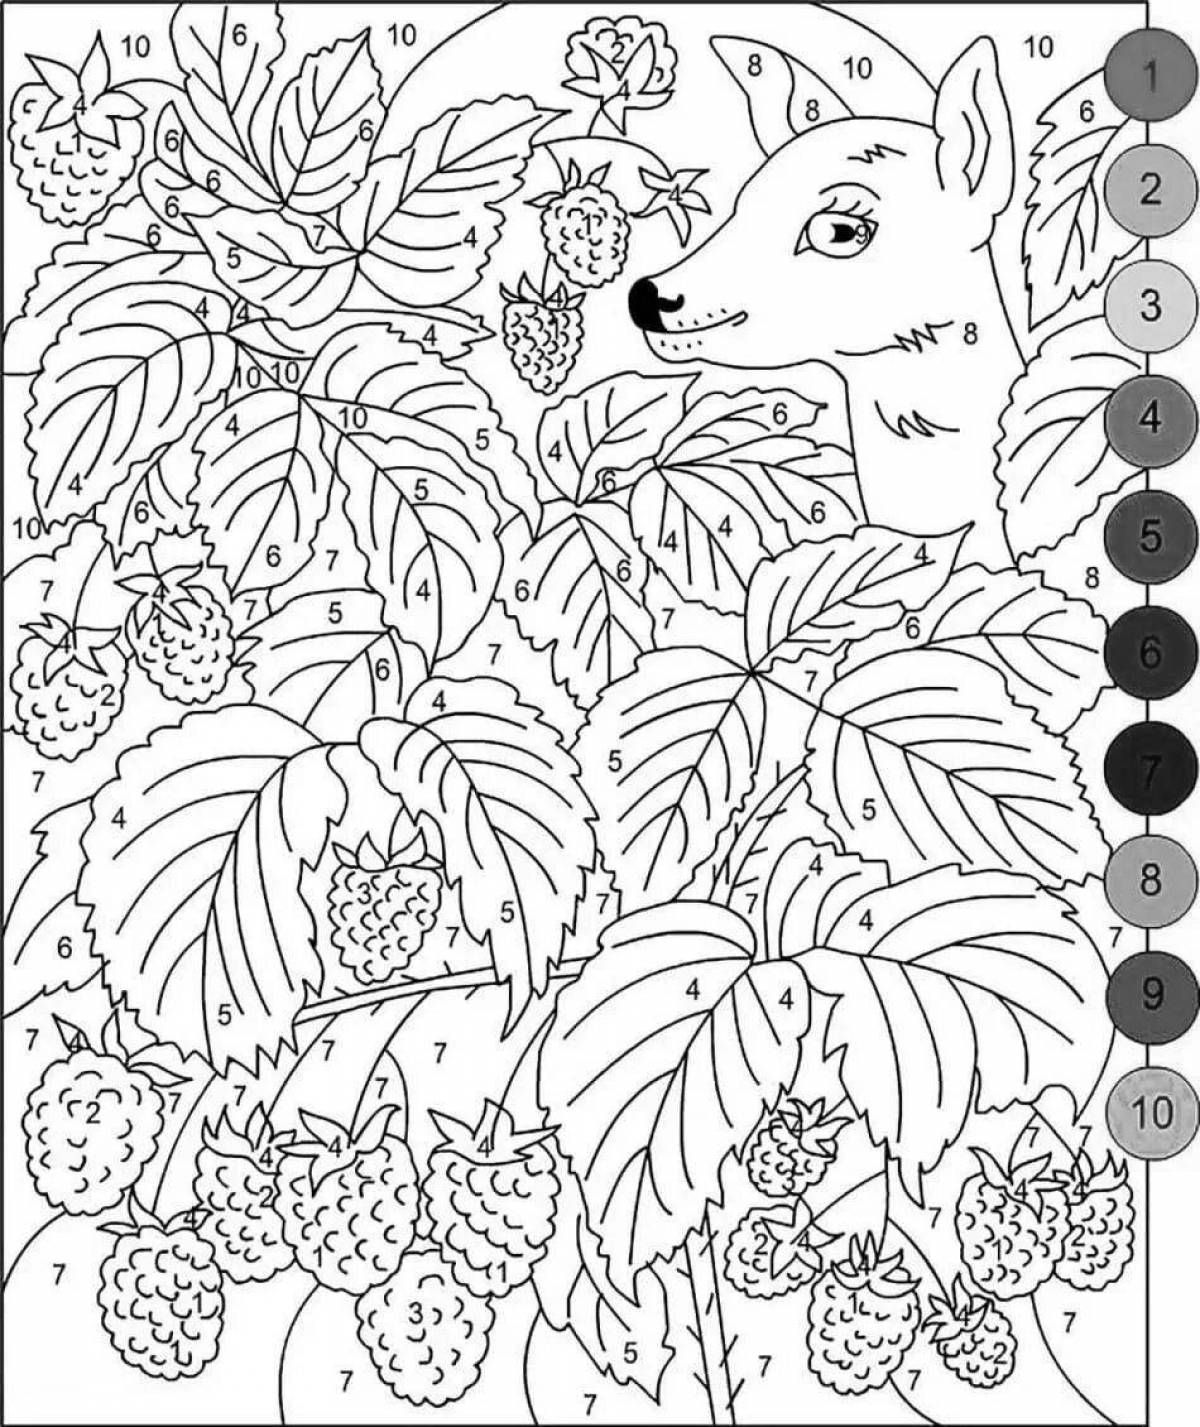 Live coloring by numbers